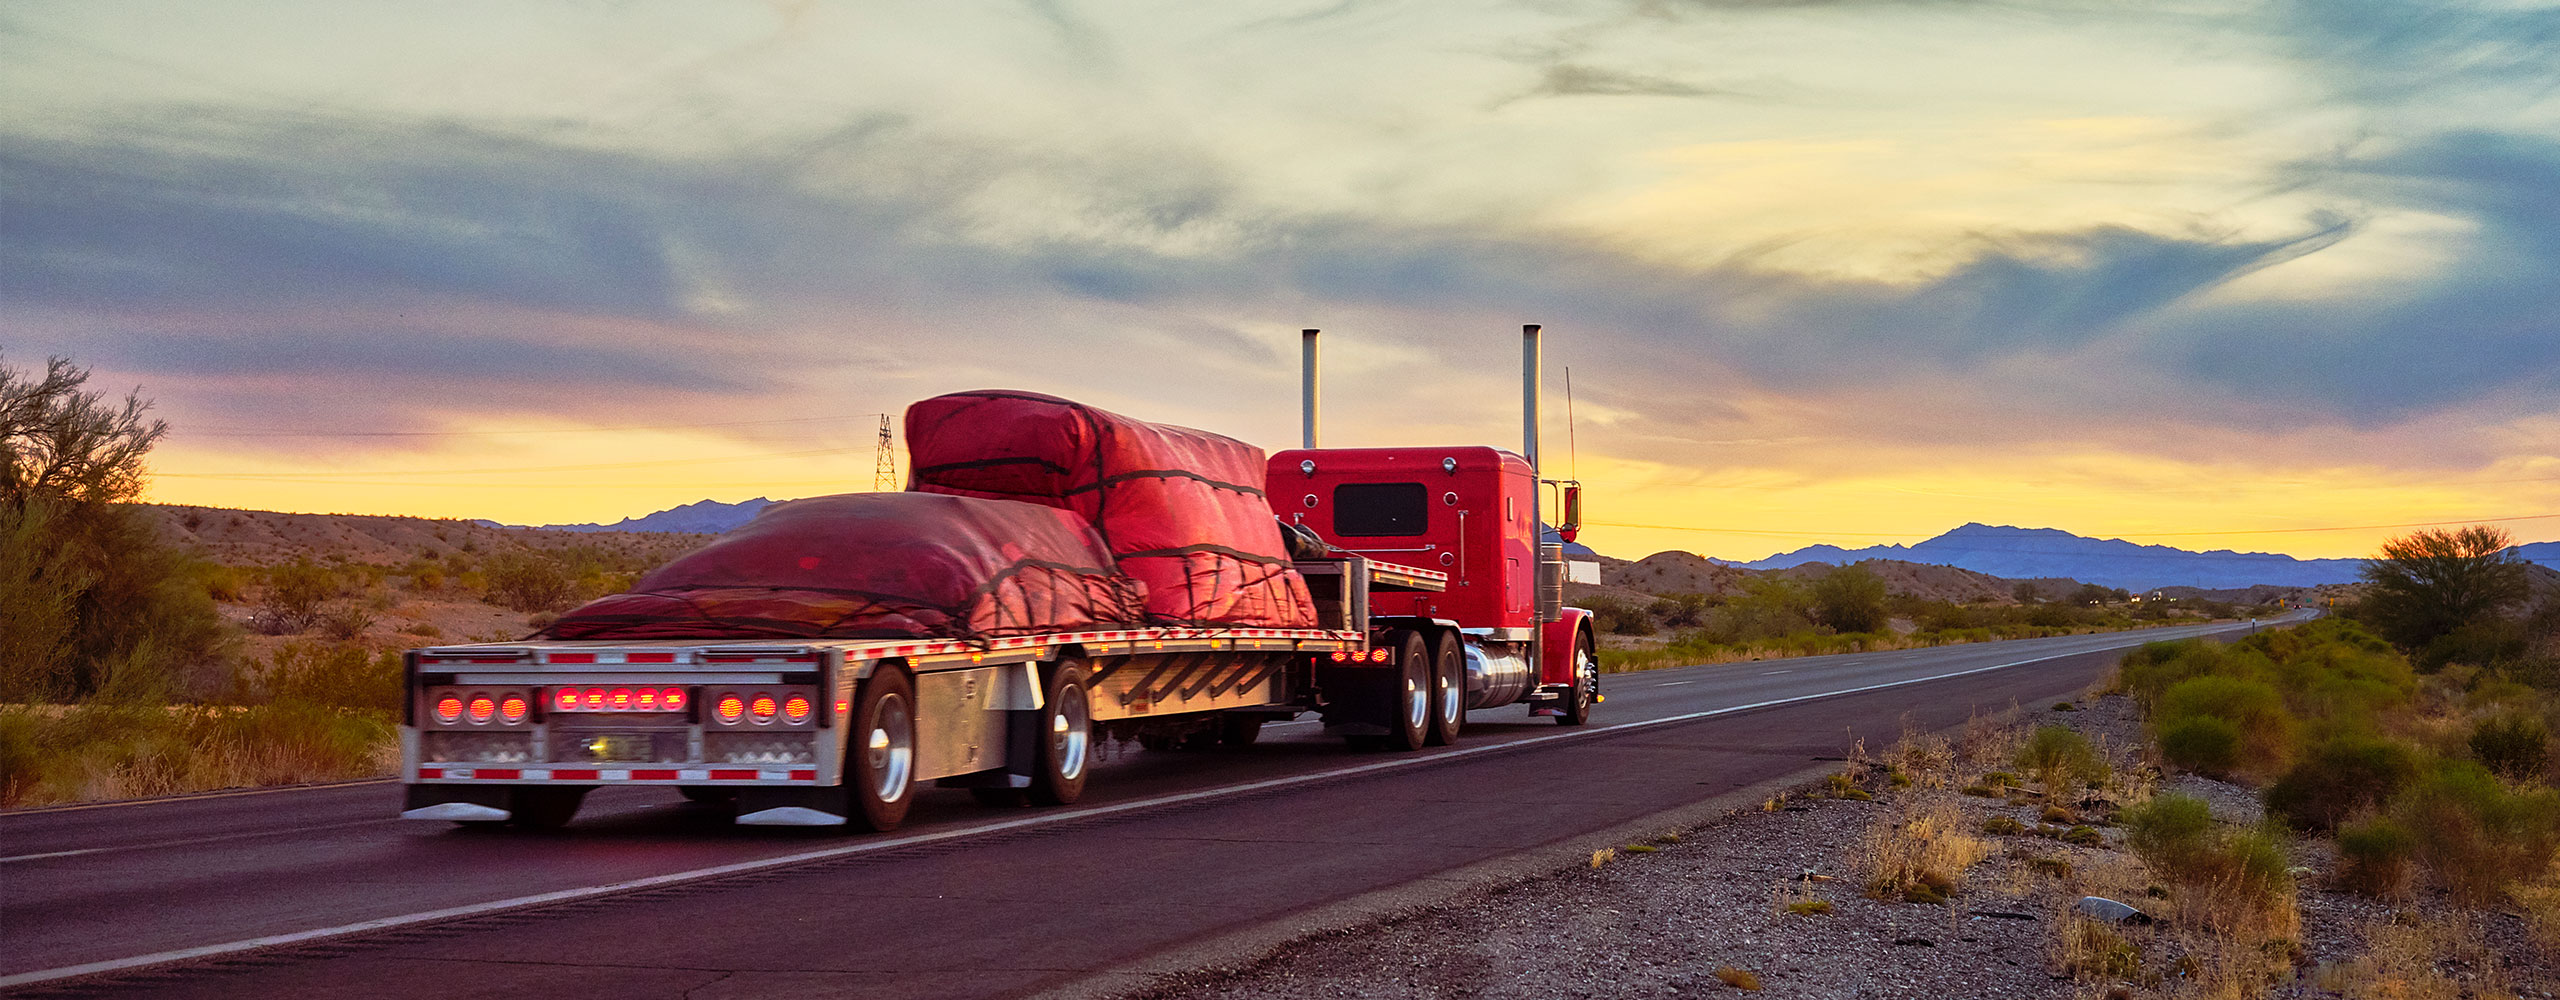 Red flatbed truck carrying freight on highway in front of North American landscape